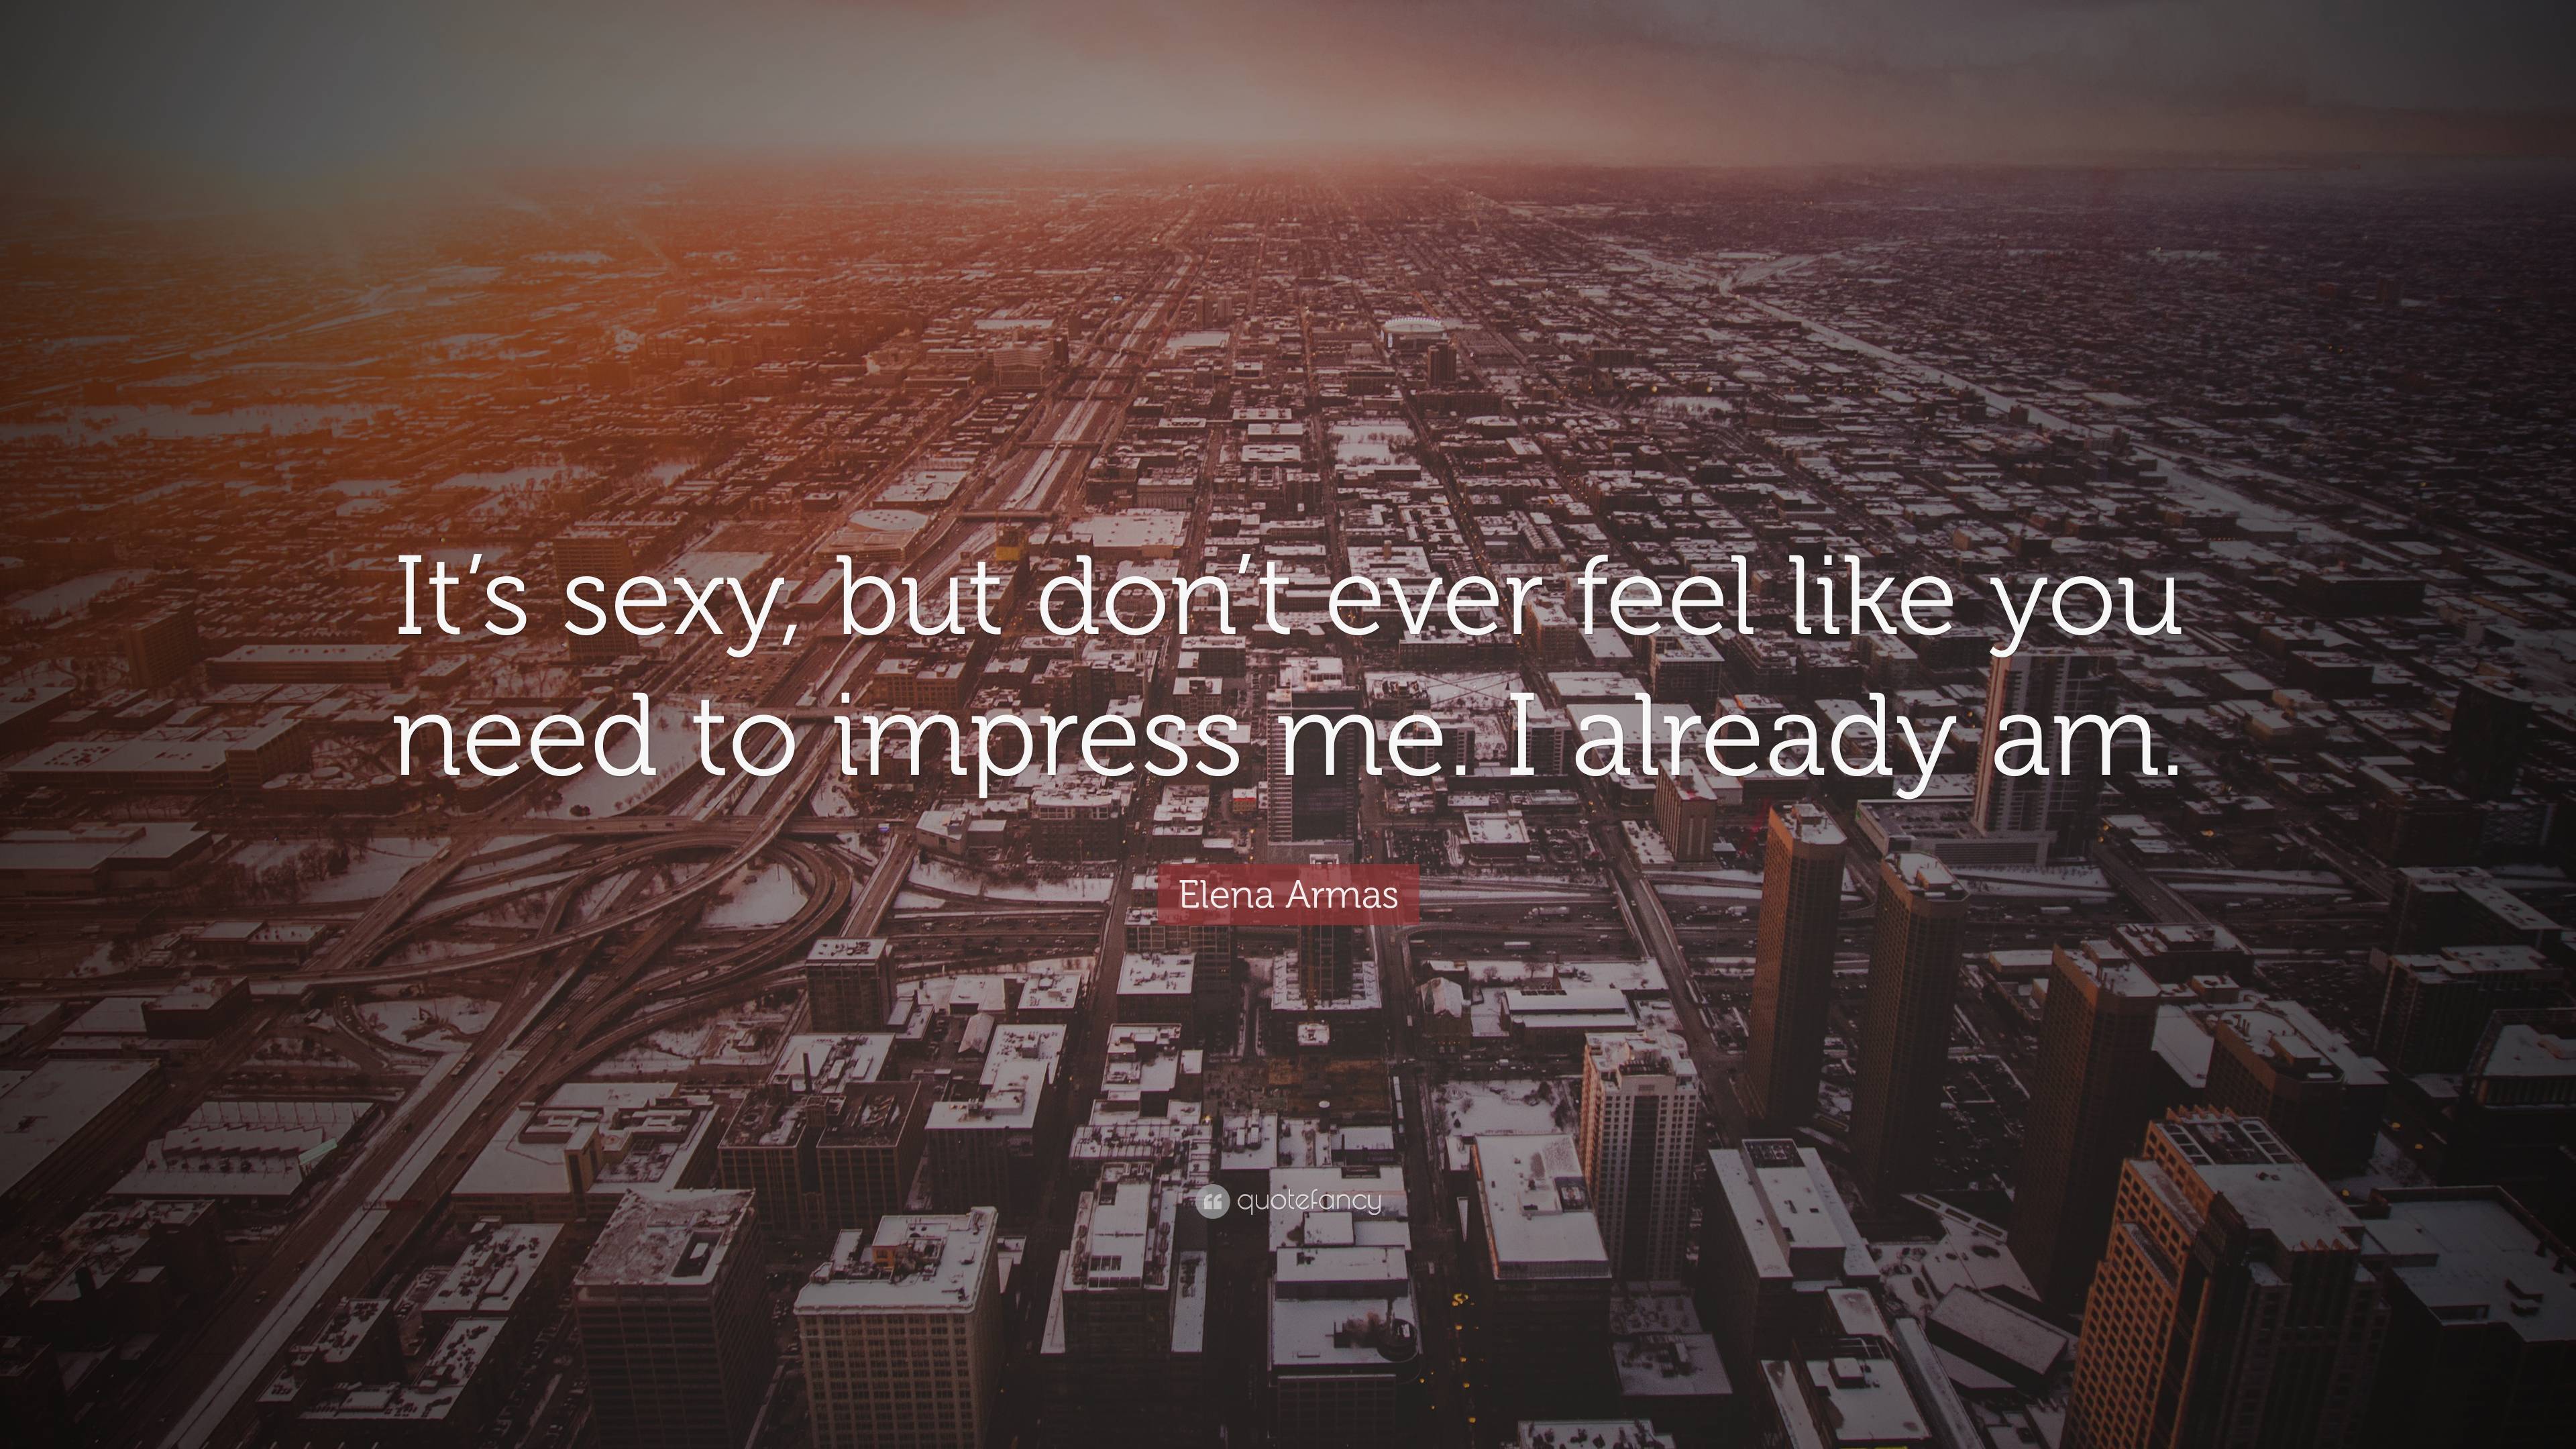 Elena Armas Quote: “It's sexy, but don't ever feel like you need to impress  me.